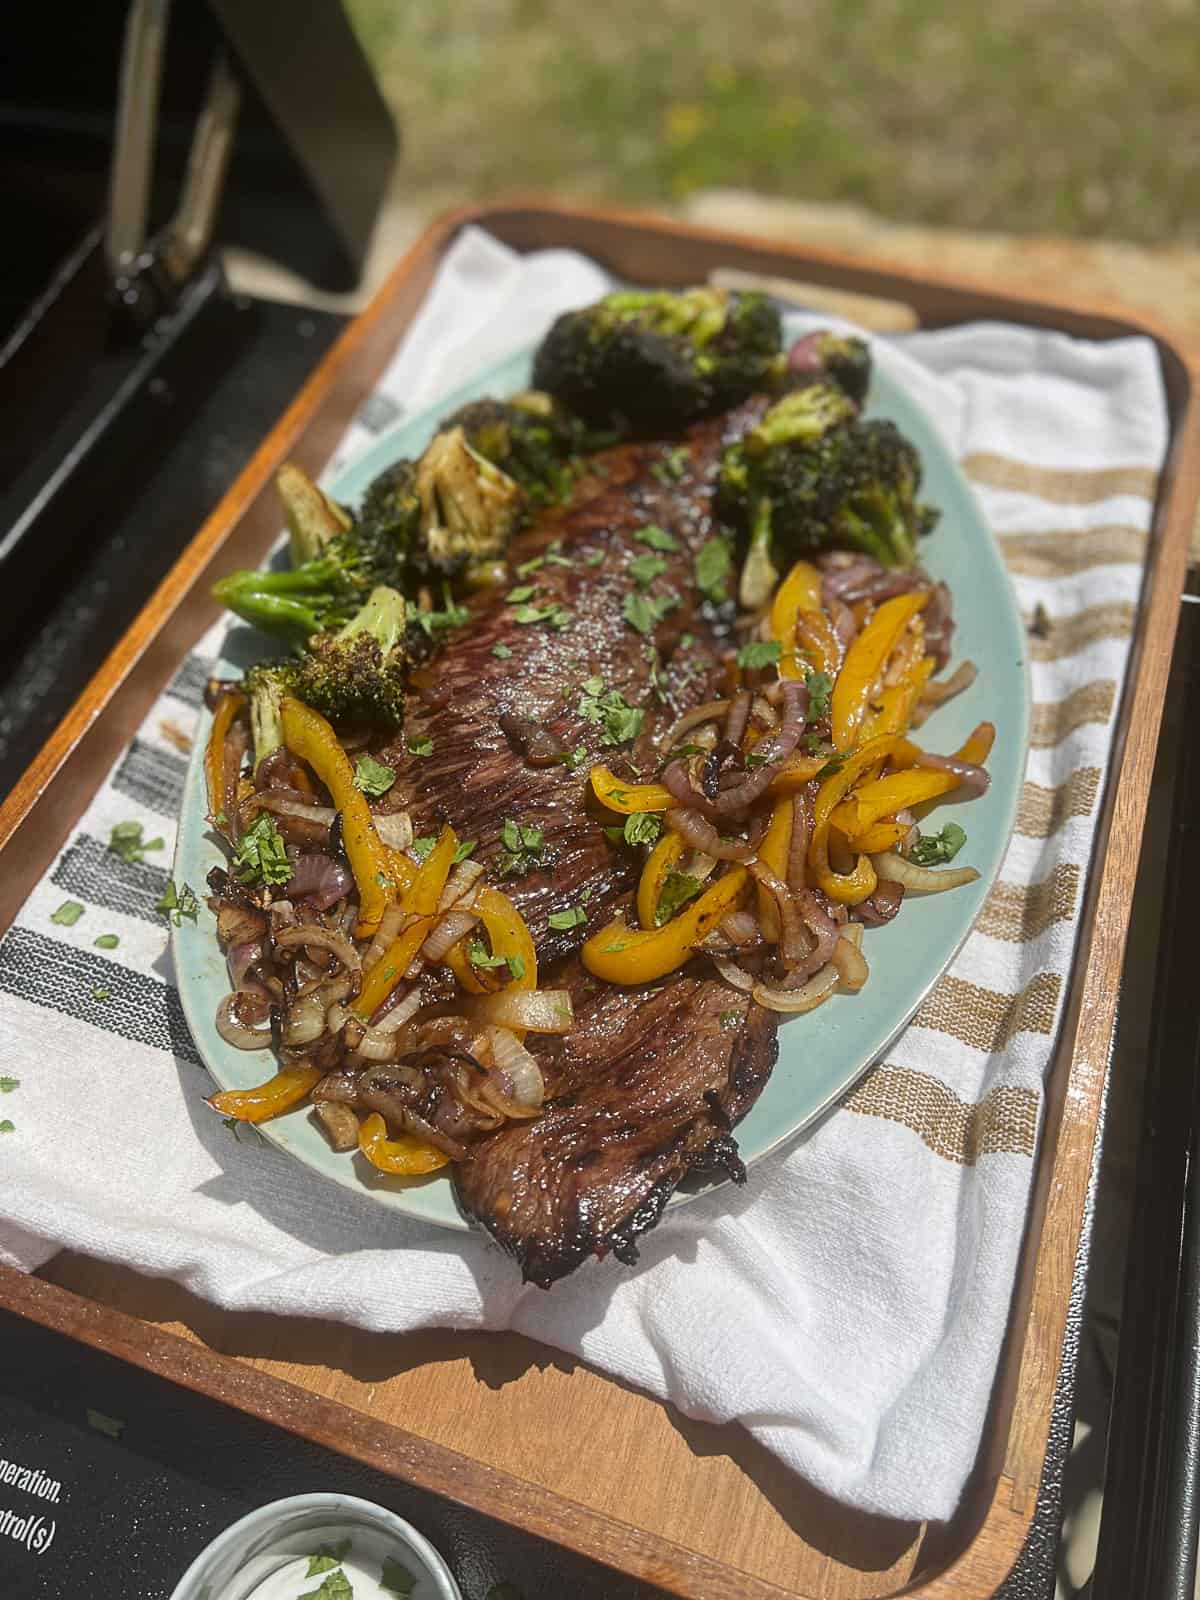 Griddle Grilled Beef Loin Top Sirloin On a Dinner Platter with Vegetables